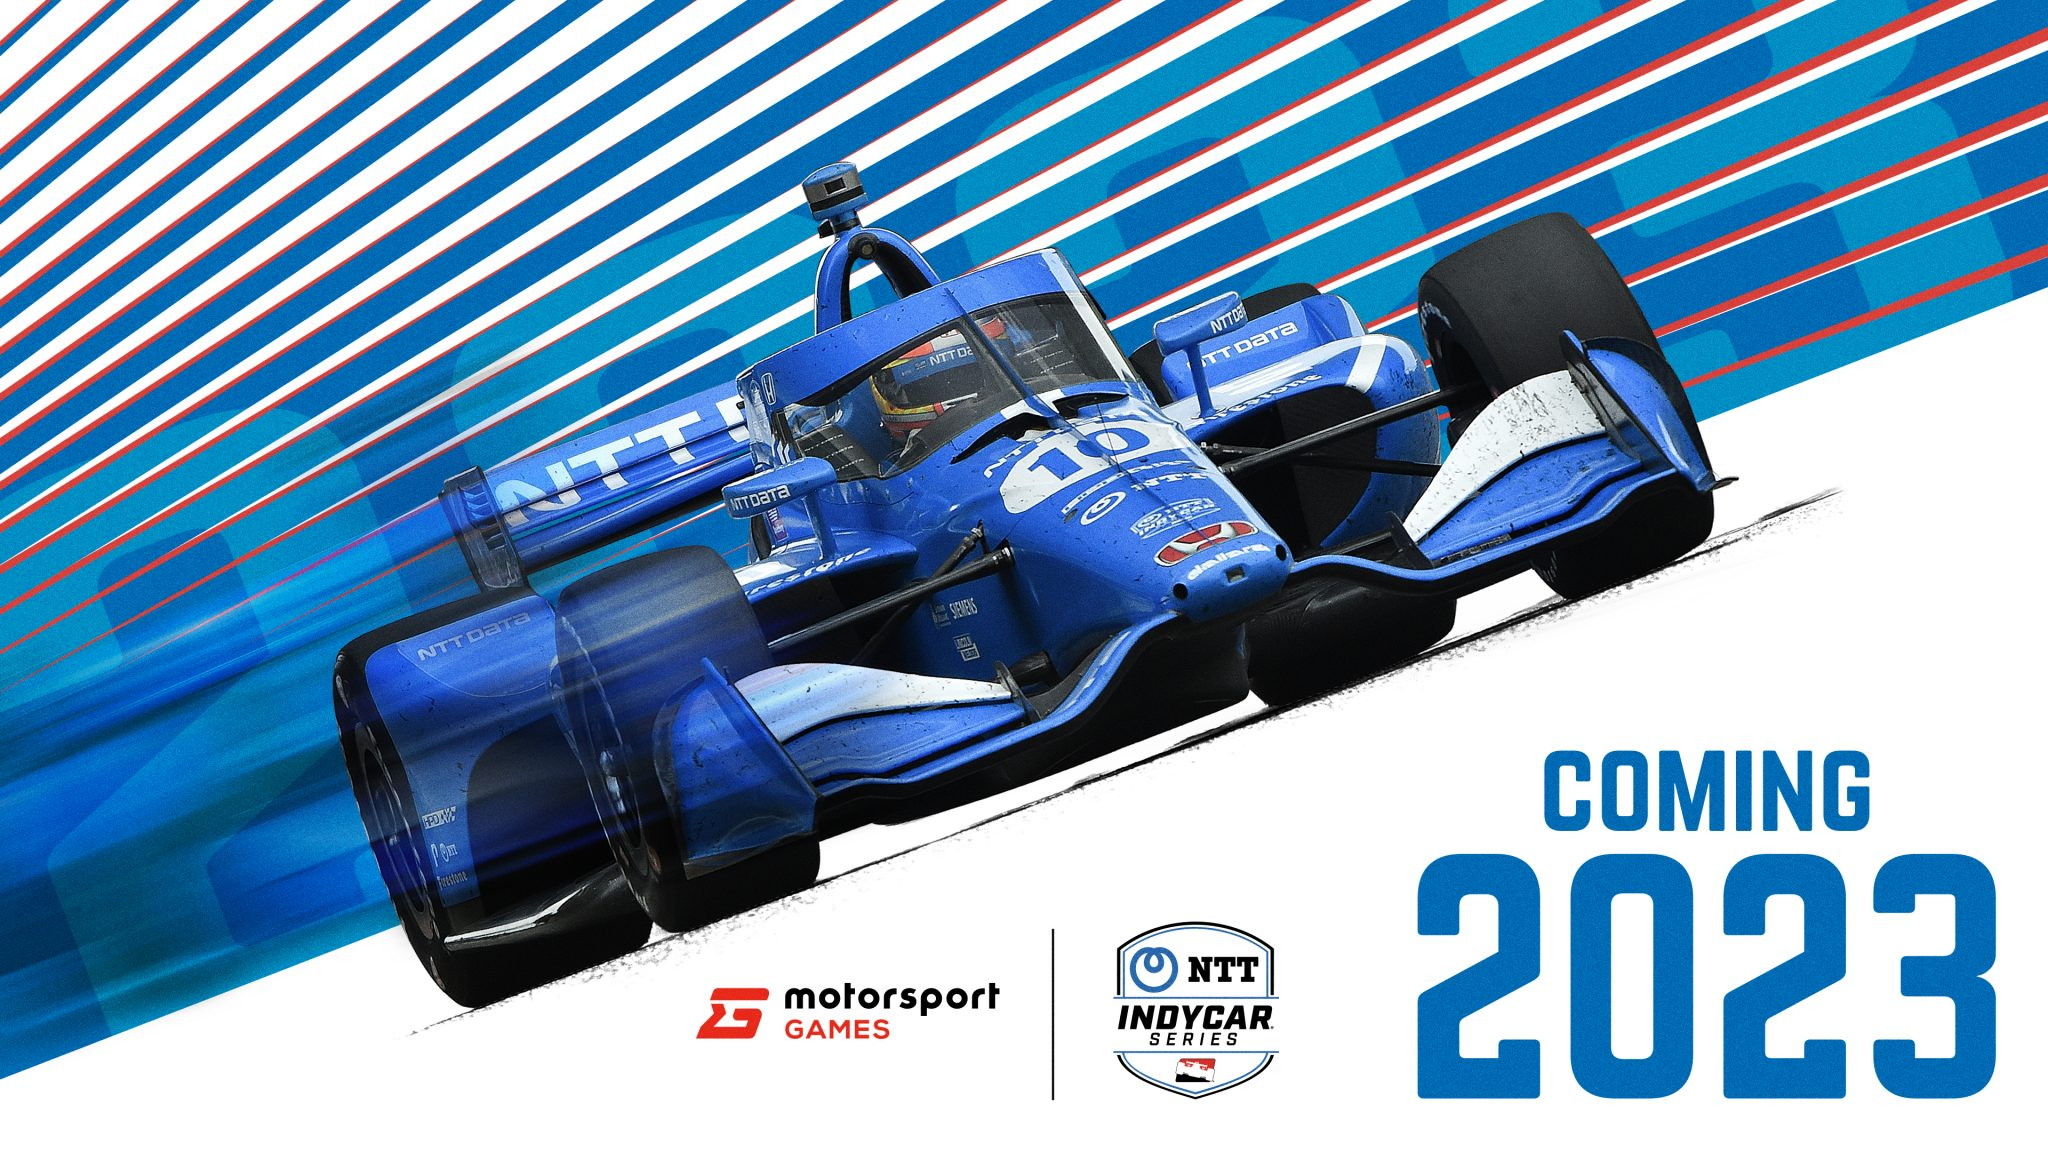 After Nearly Two Decades Indycar Is Finally Getting Its Own Game In 2023 165452 1 